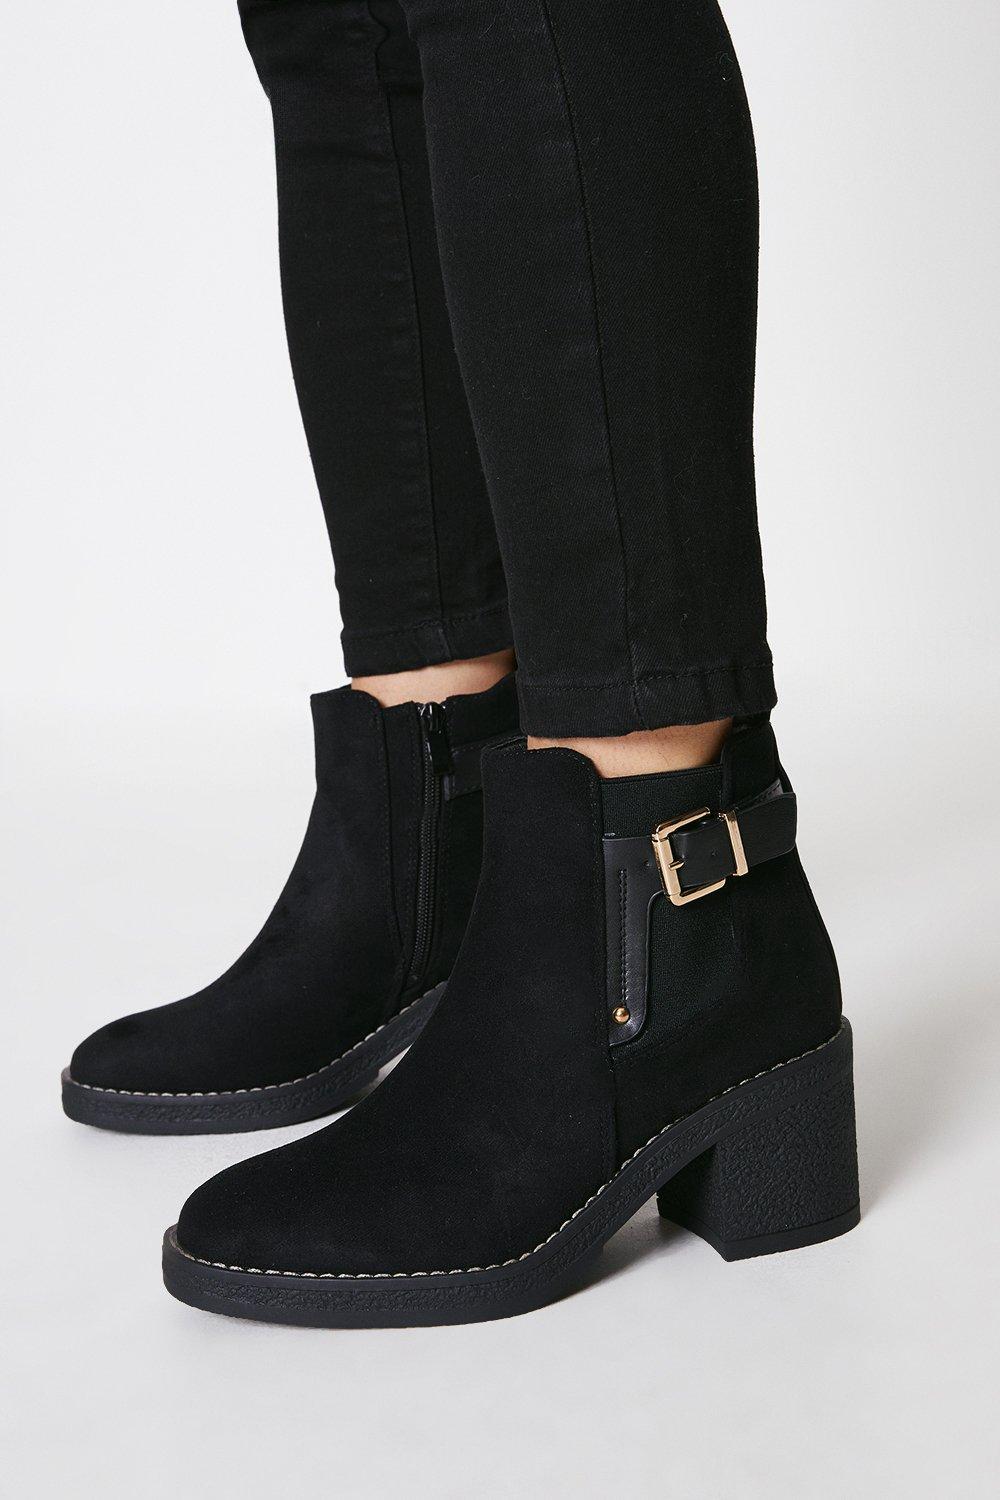 Women’s Armour Buckle Mid Heel Ankle Boots - black - 4